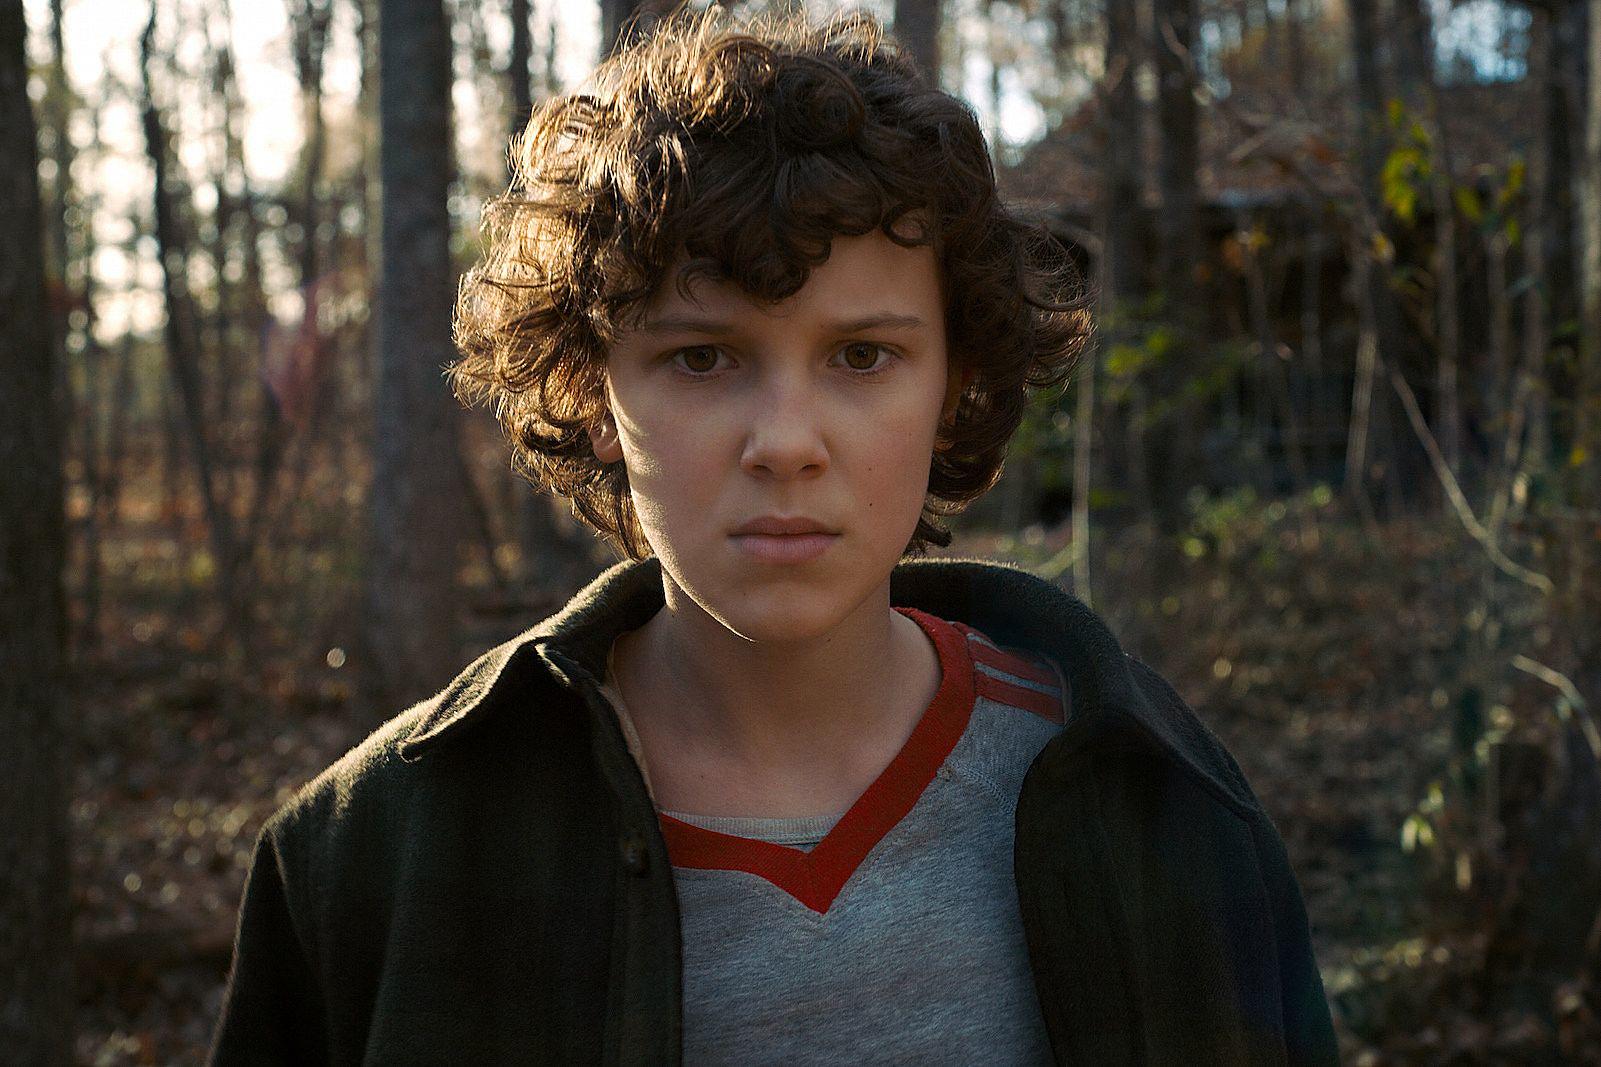 Millie Bobby Brown Is Ready For 'Stranger Things' To End: “It's